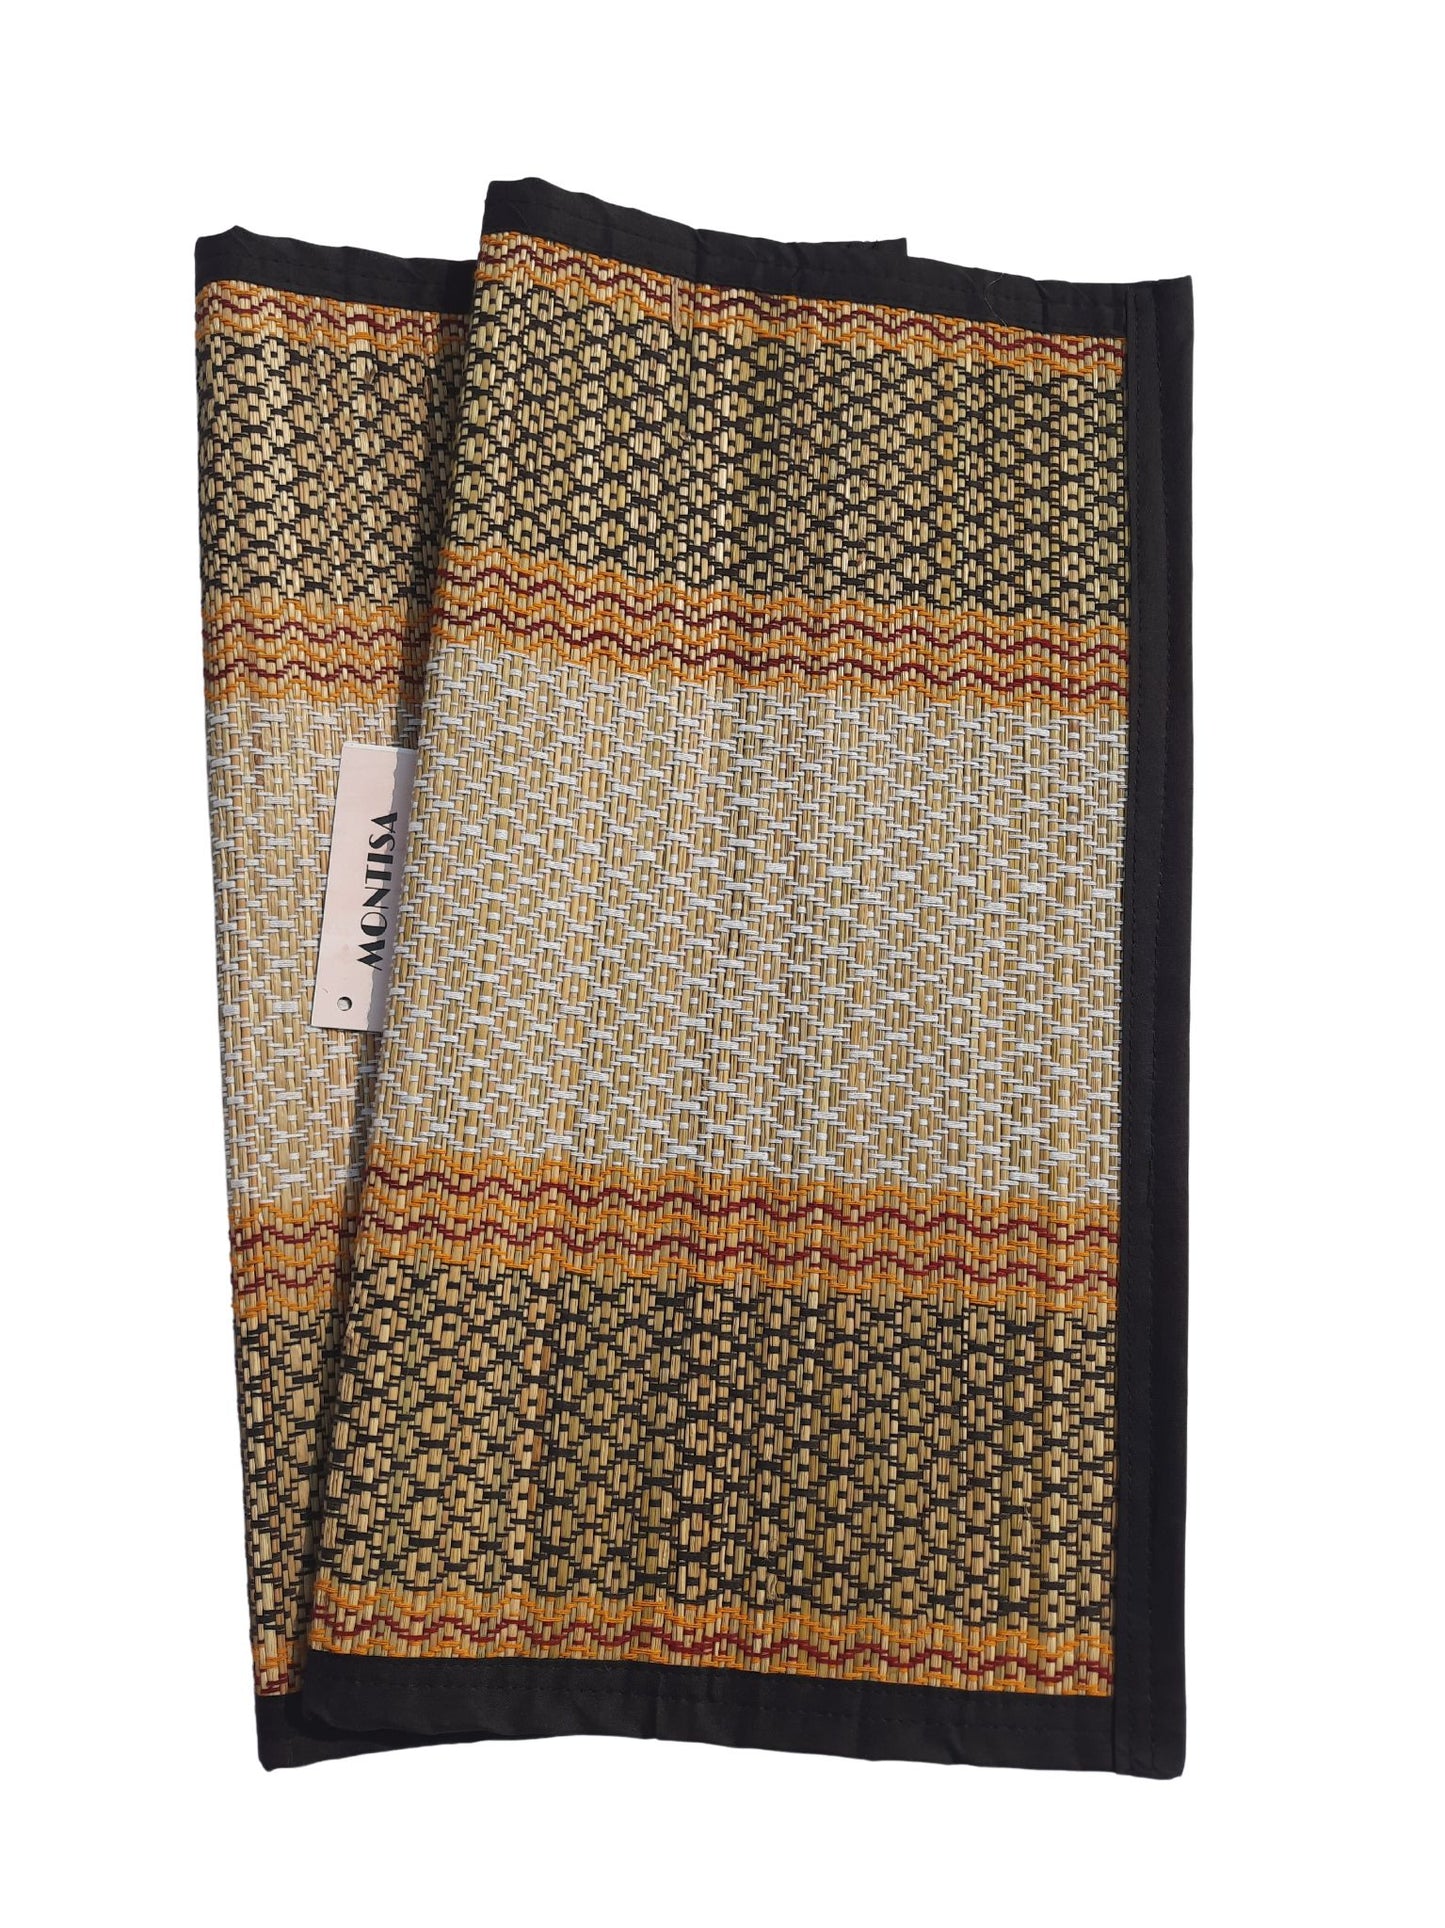 Pooja mat for sitting on floor Madurkathi grass made pooja aasan 18x18 inches  2 square shape -T3-16